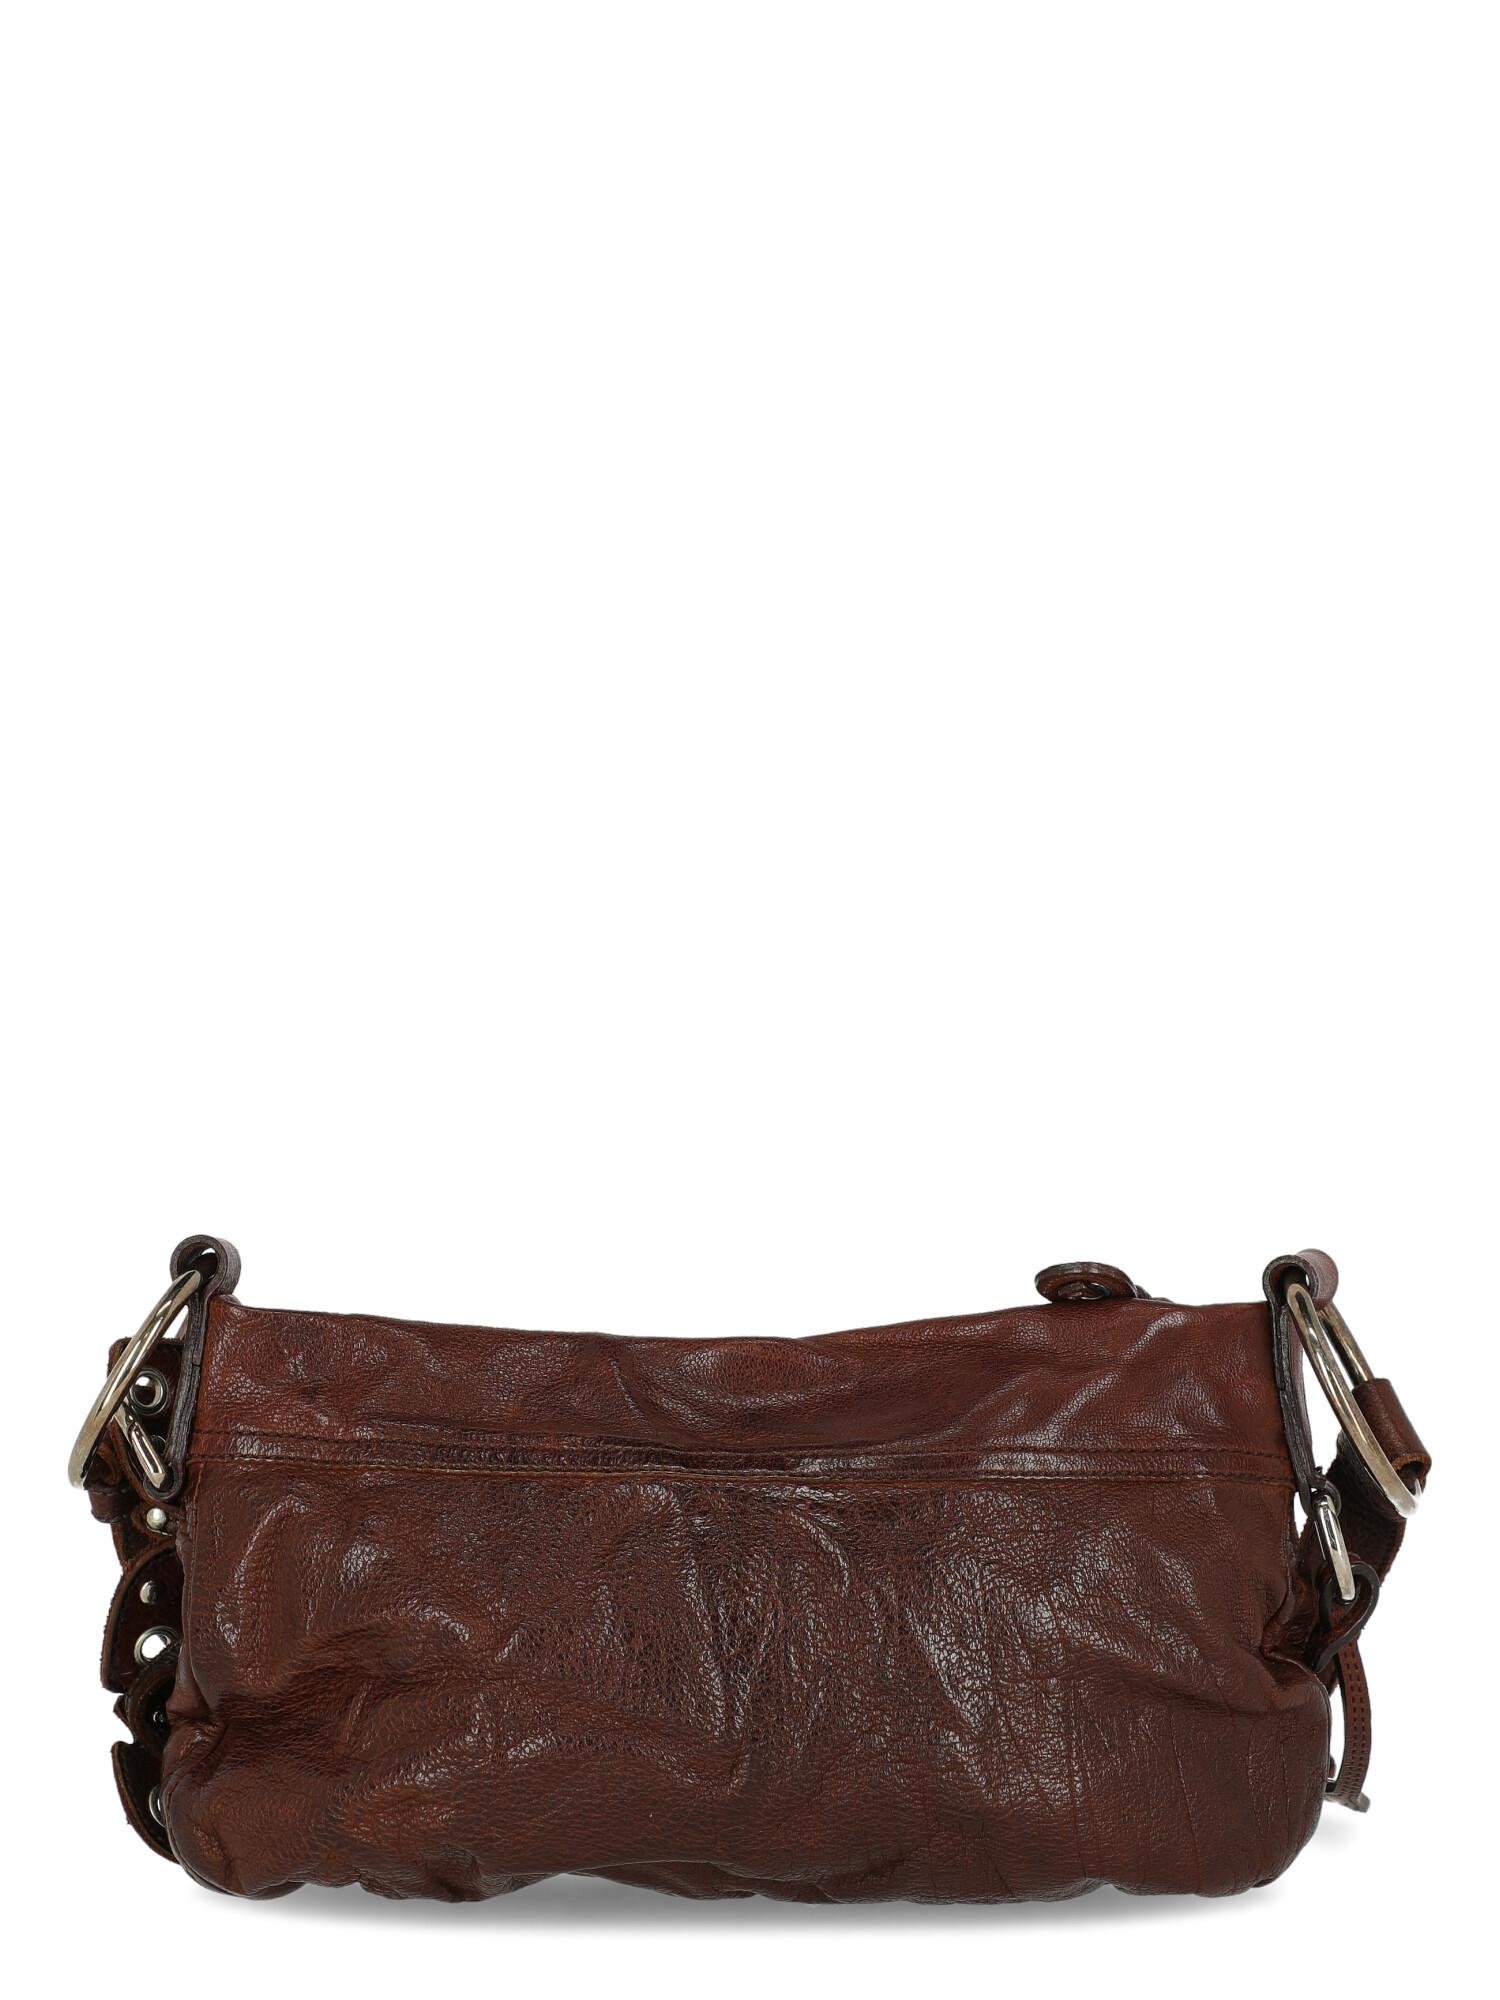 Miu Miu  Women   Shoulder bags   Brown Leather  In Fair Condition For Sale In Milan, IT